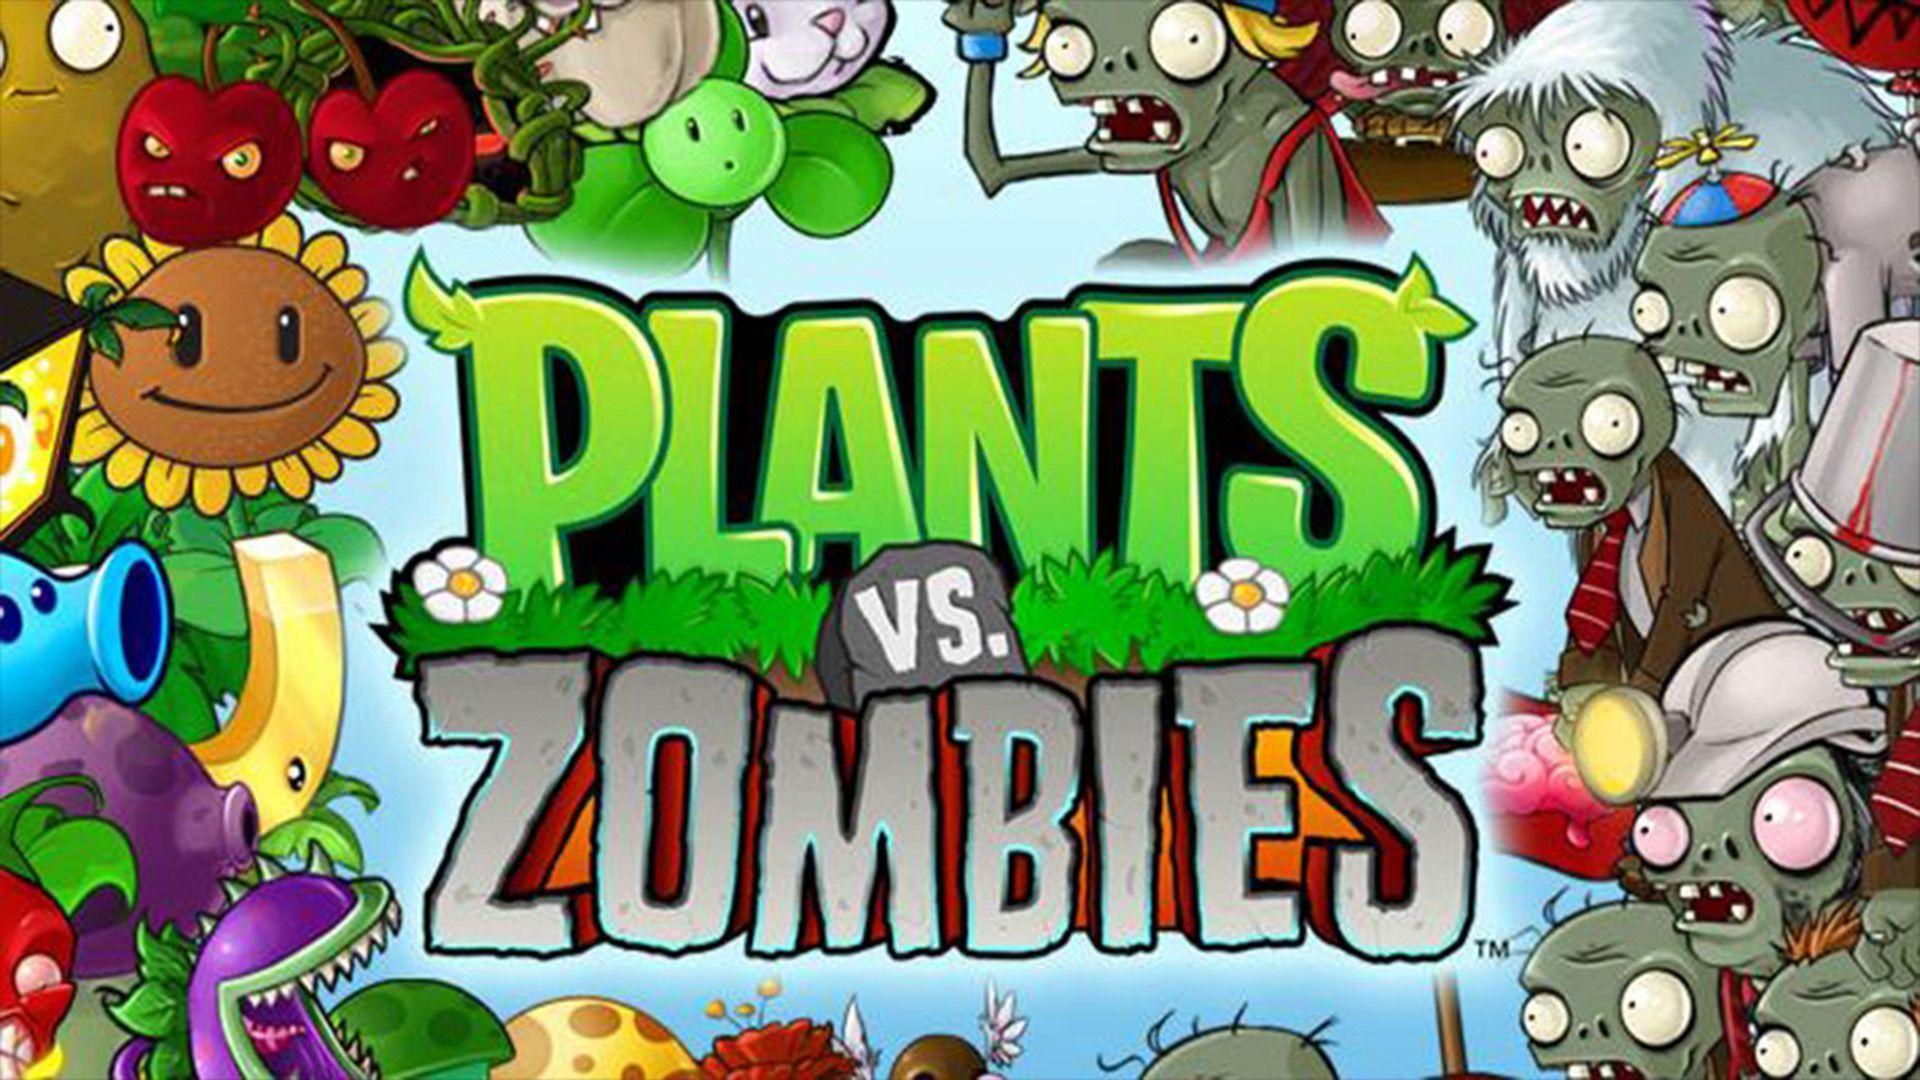 download the last version for iphonePlants vs. Zombies